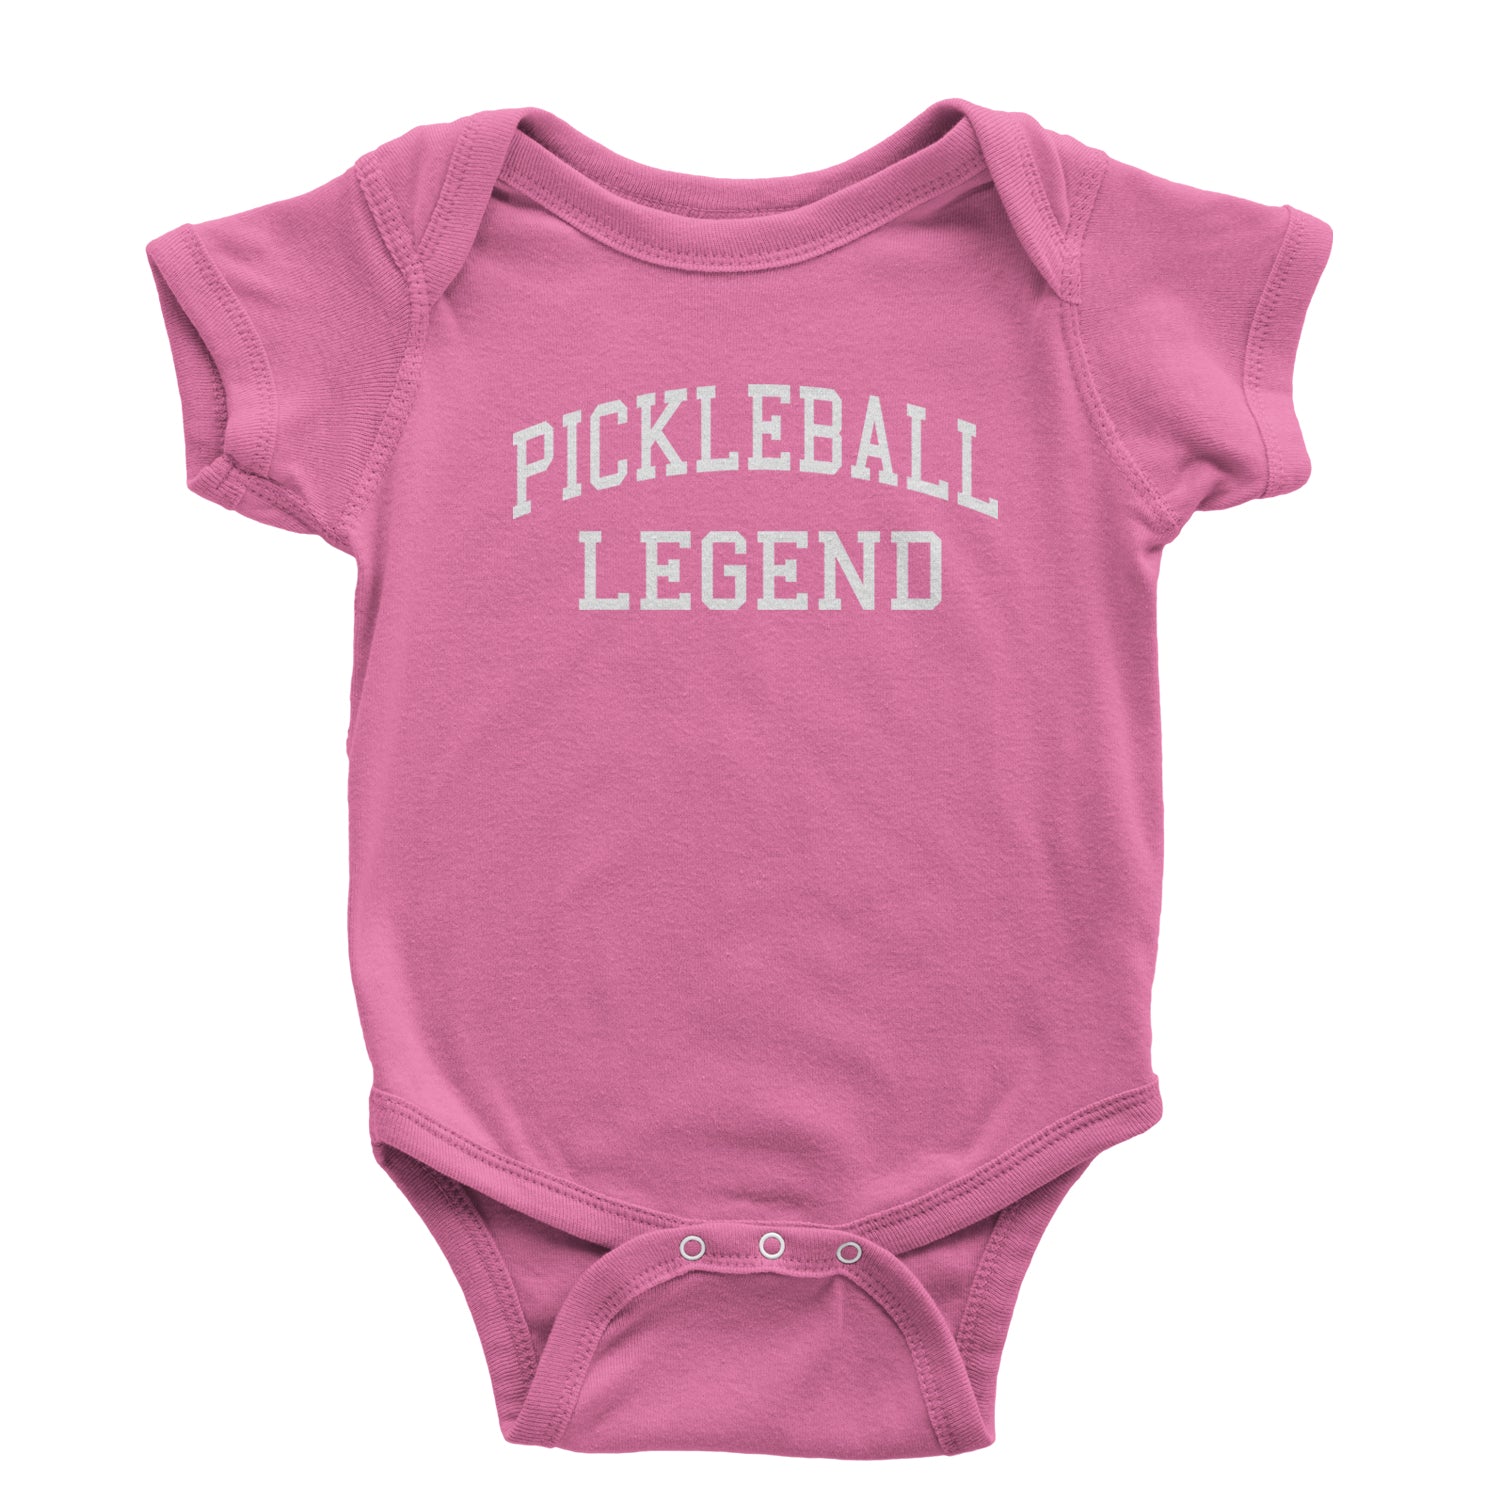 Pickleball Legend Infant One-Piece Romper Bodysuit and Toddler T-shirt ball, dink, dinking, pickle, pickleball by Expression Tees